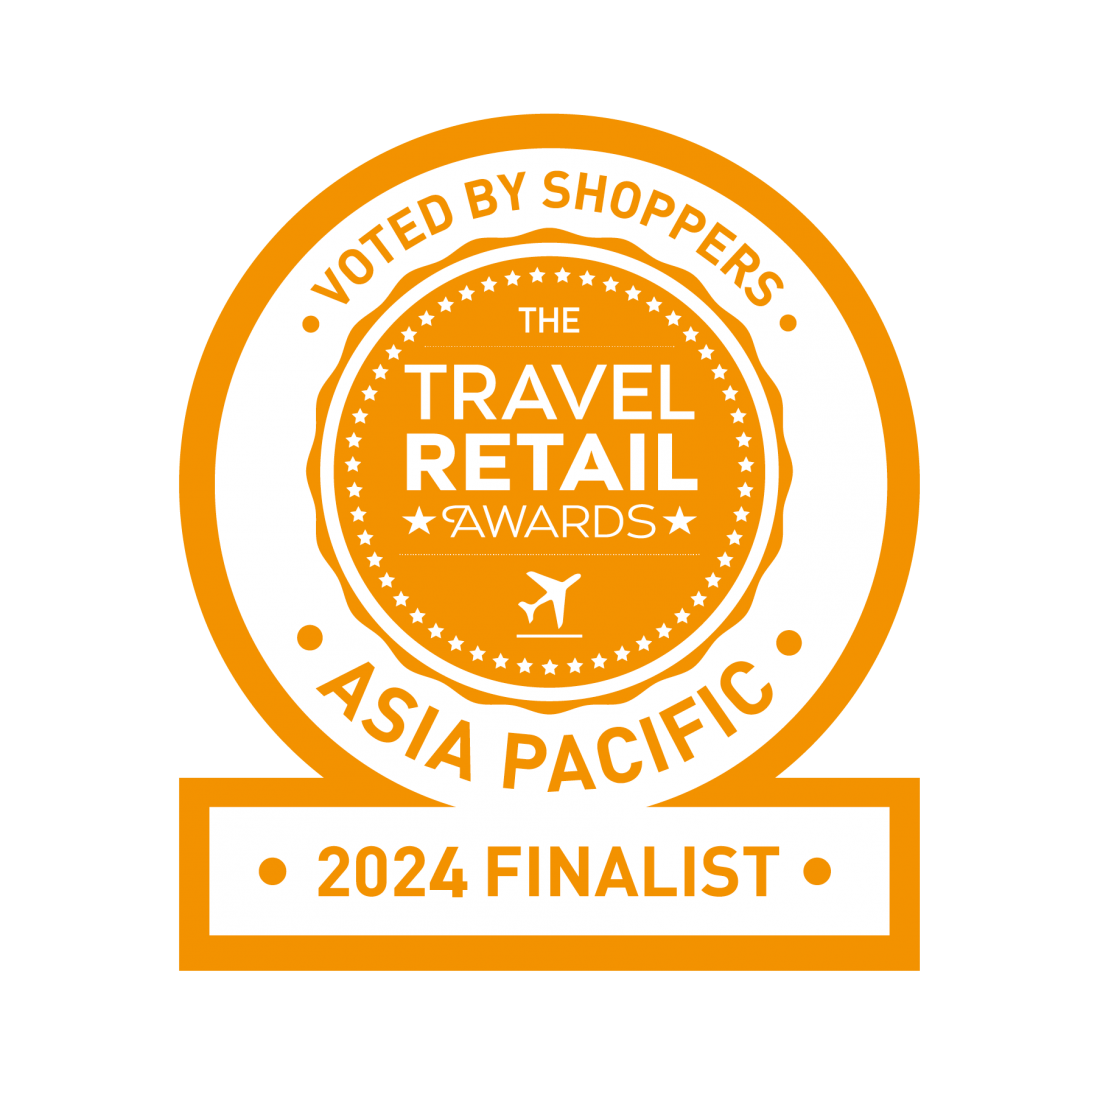 Food Academy, a finalist of the Asia Pacific Travel Retail Awards 2024!